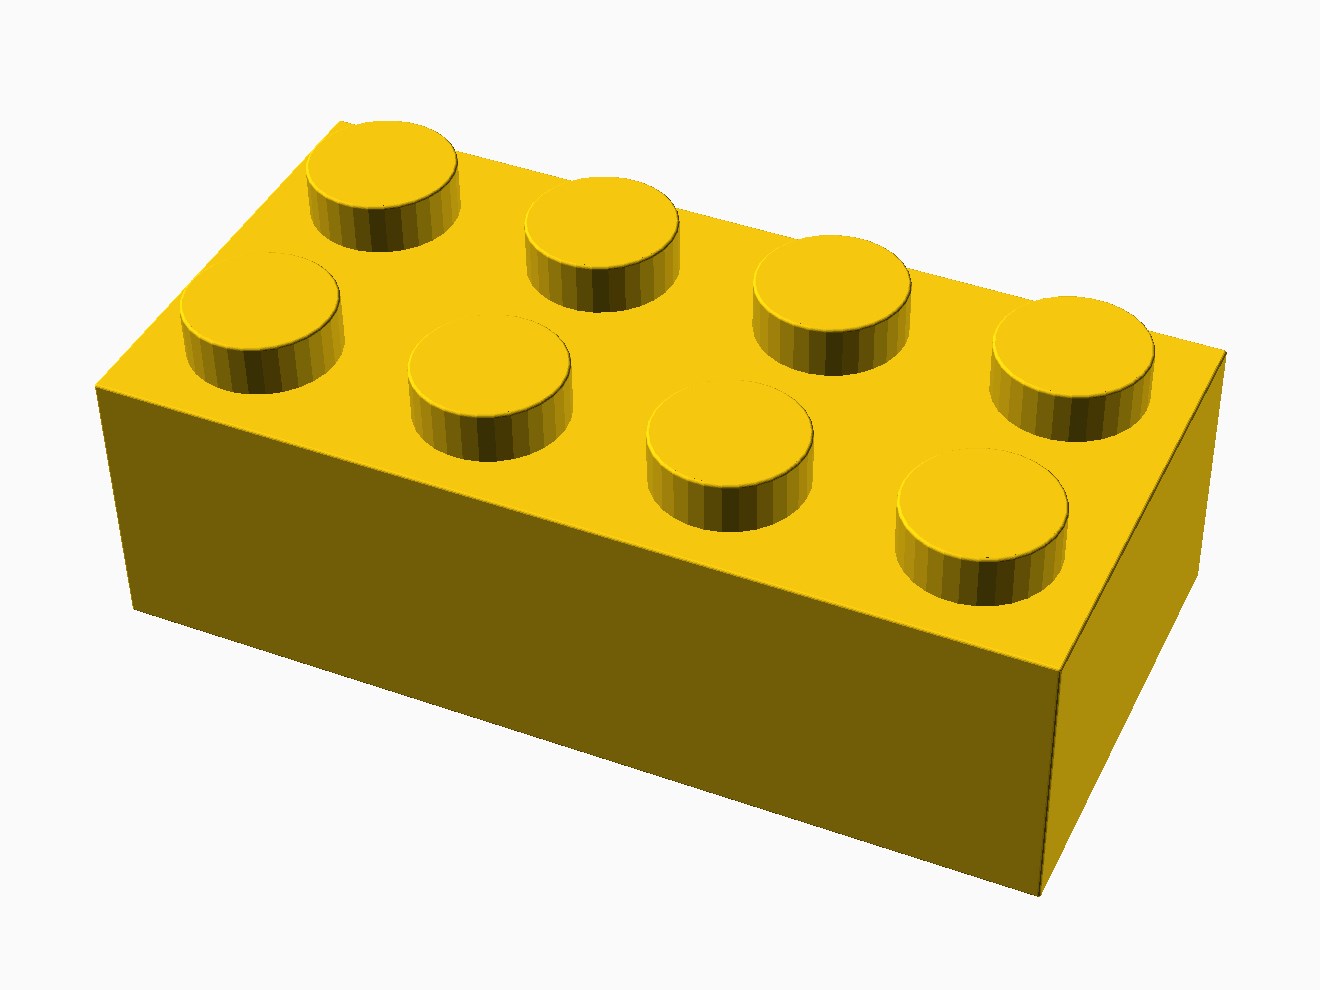 3D printable model of a LEGO 4x2 Brick with standard knobs.